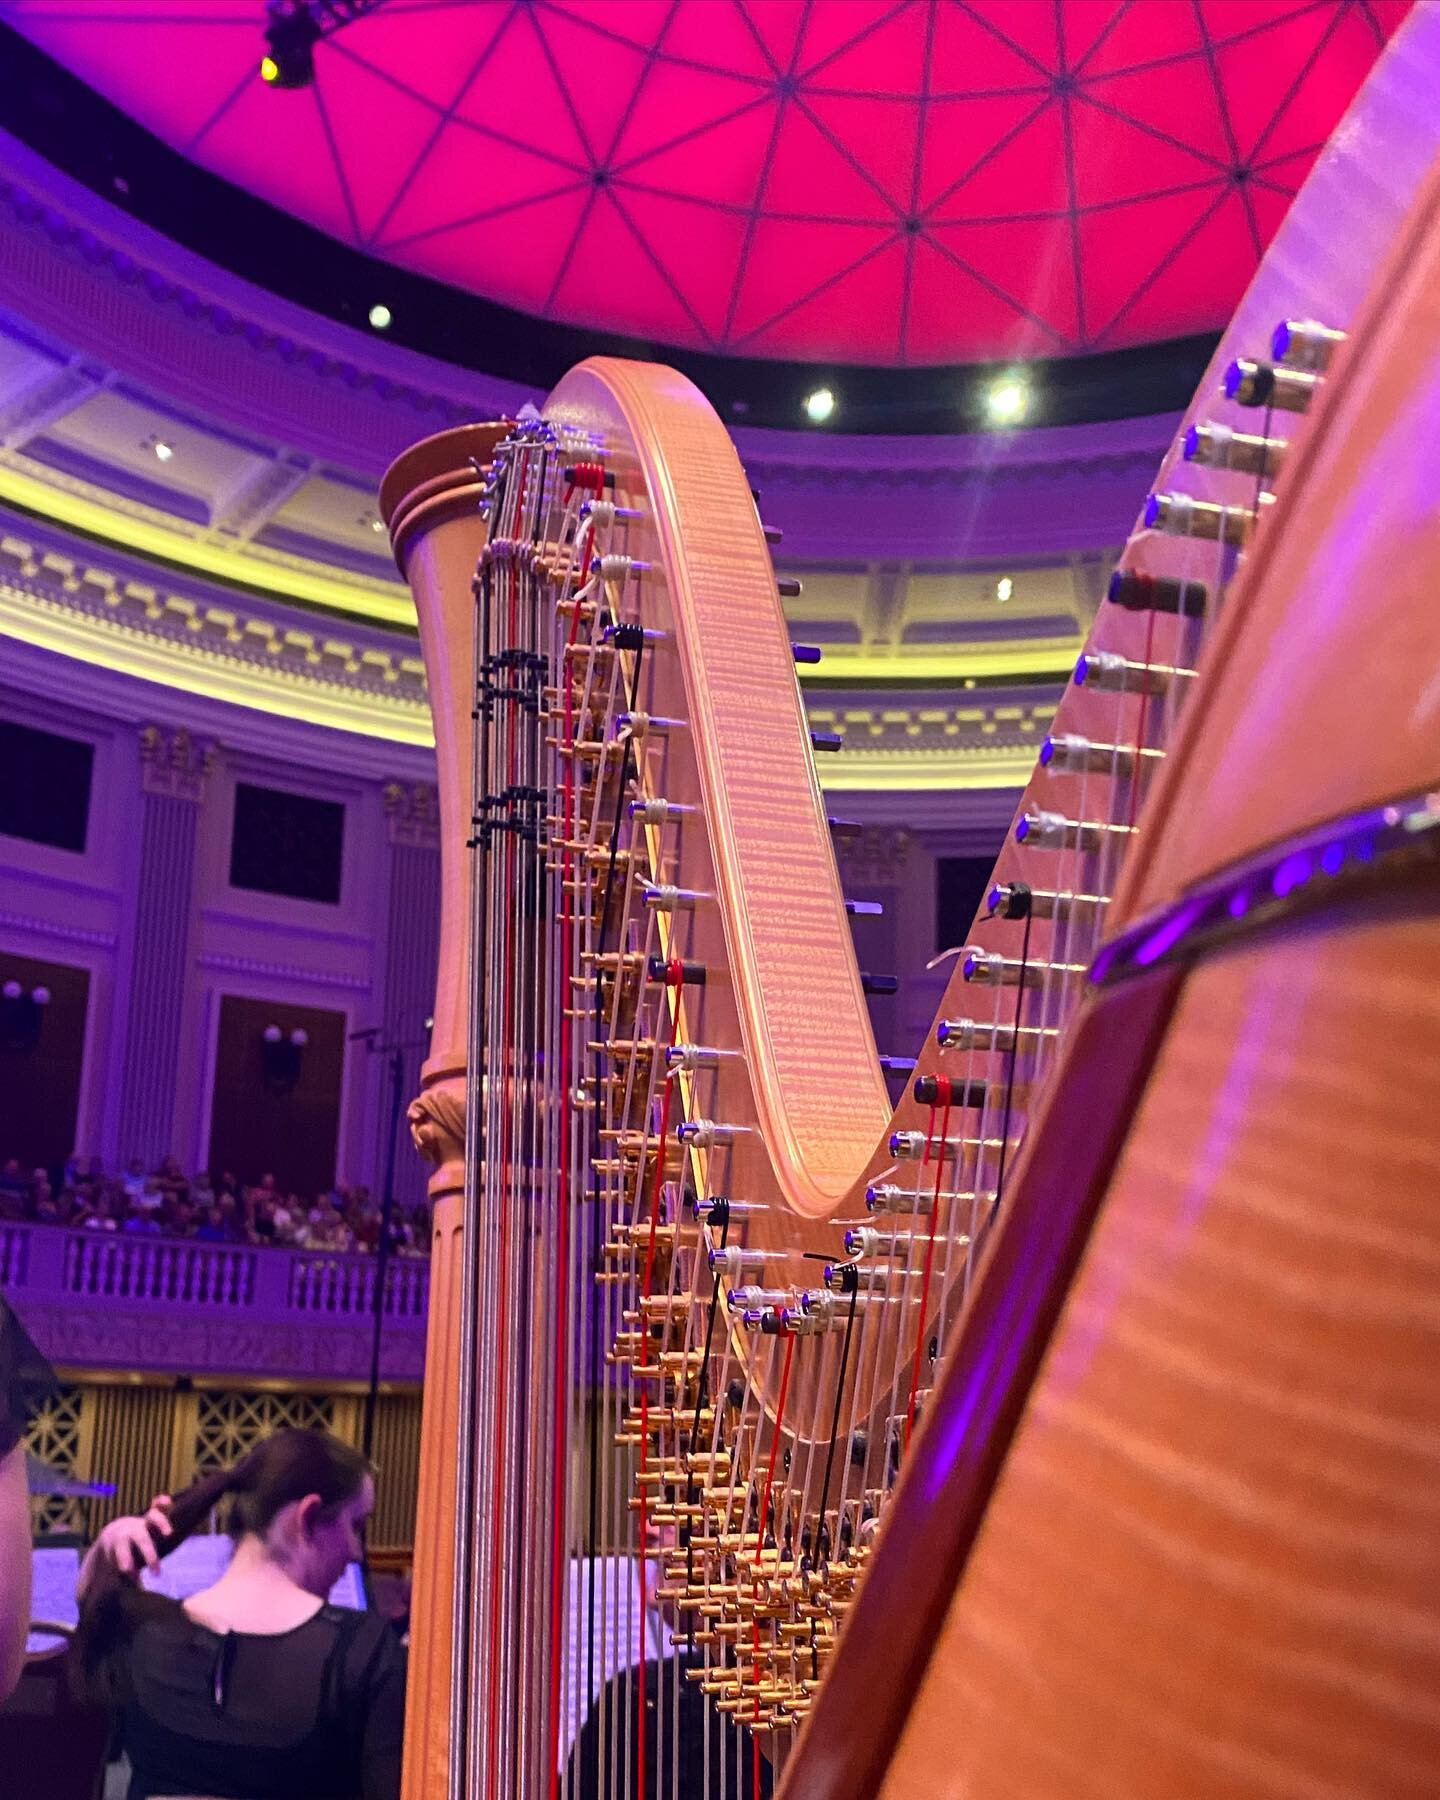 [Time flies when you&rsquo;re having fun?] 

Another day, another week, another month has flown by. Another classic harp pov shot from a concert from a while ago. Be prepared for an incoming spam for numerous concerts in the same week. A few of them 